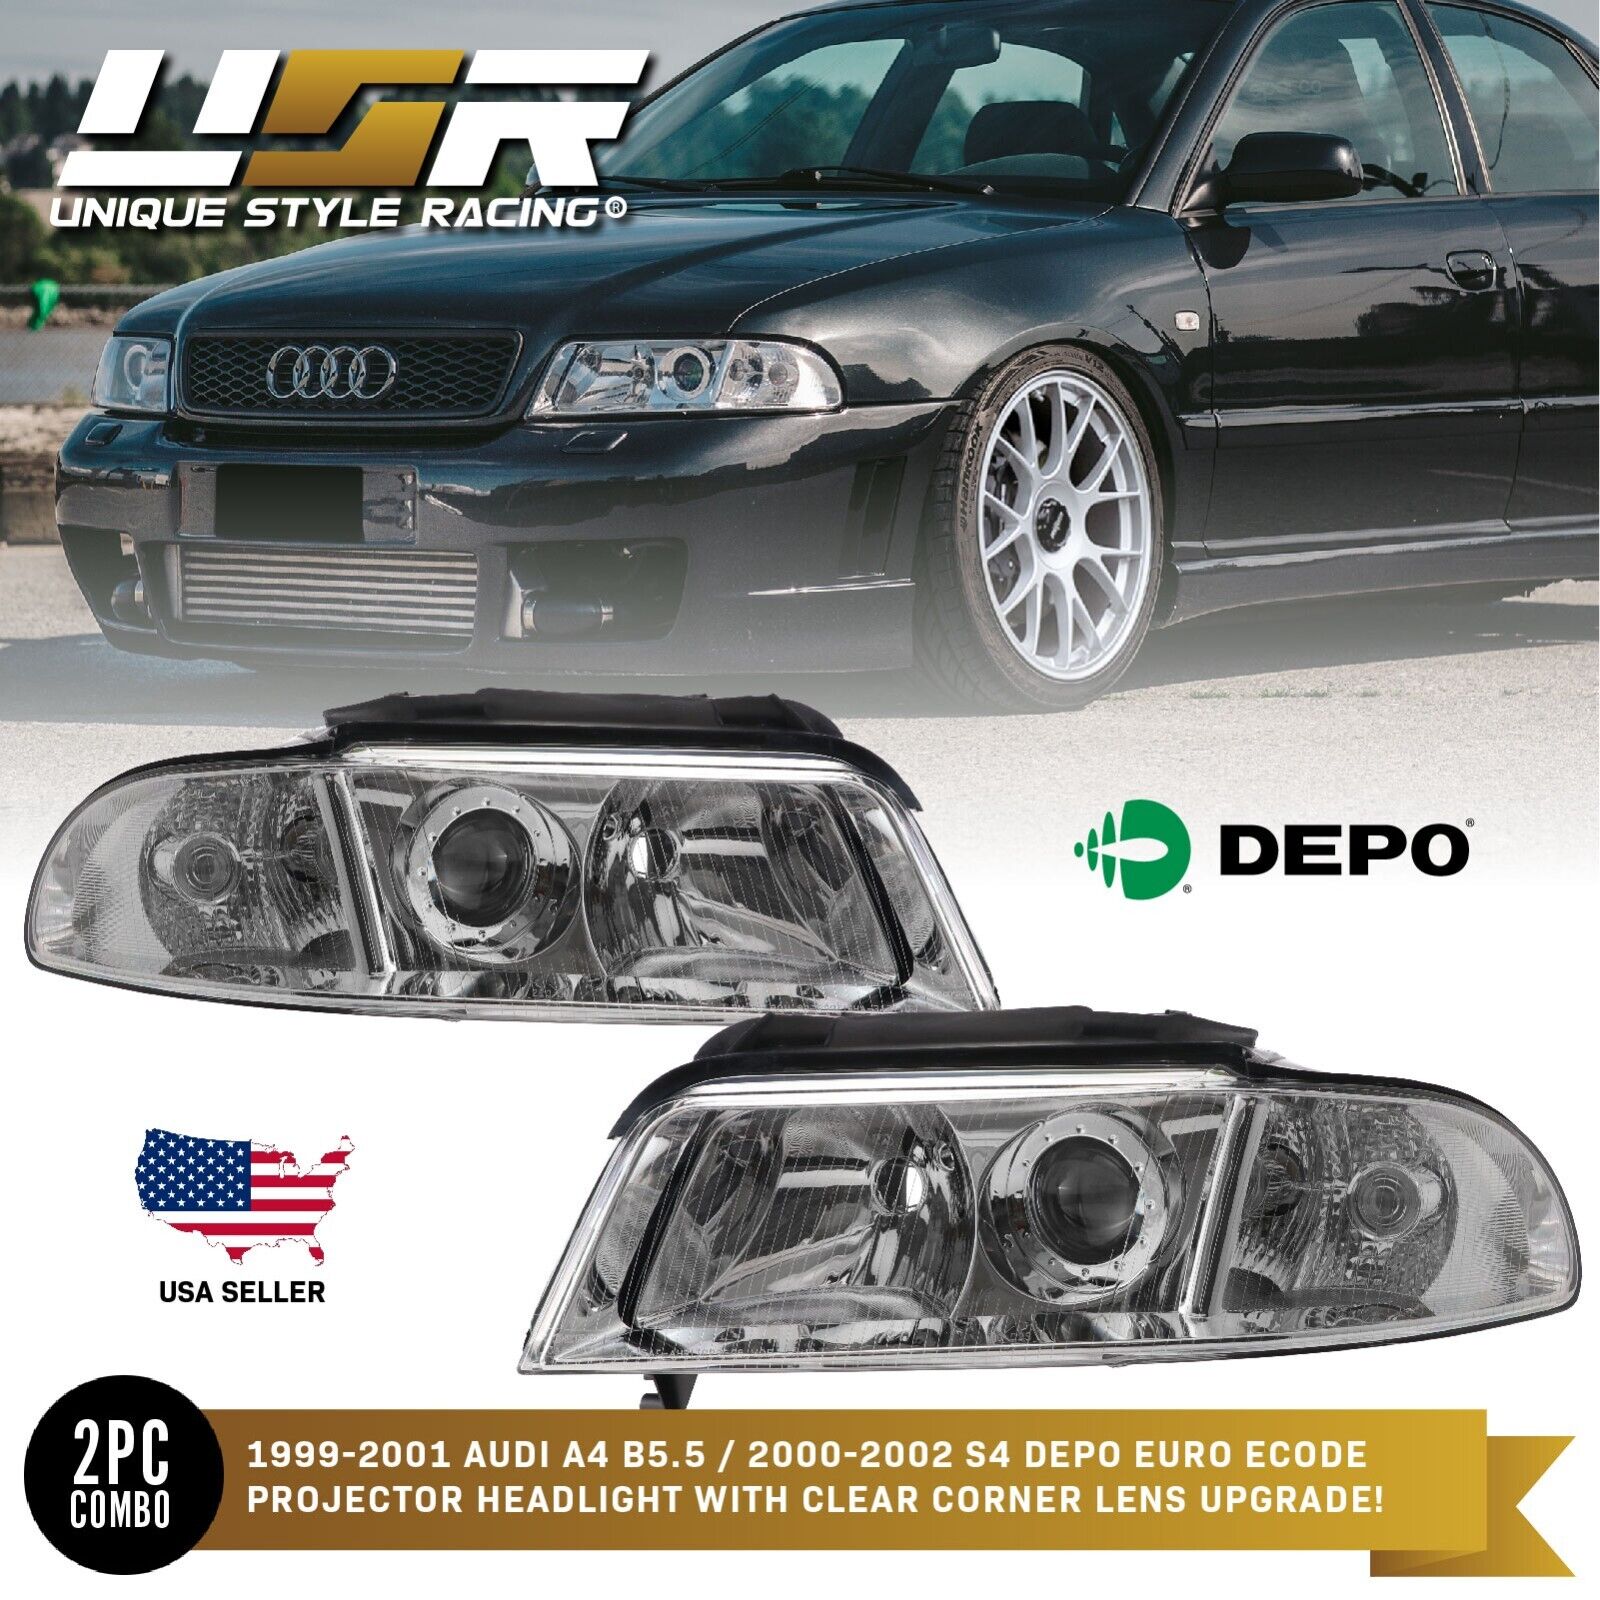 DEPO ECode Chrome Projector Headlight Pair For 99-01 Audi A4 / 00-02 S4 B5.5